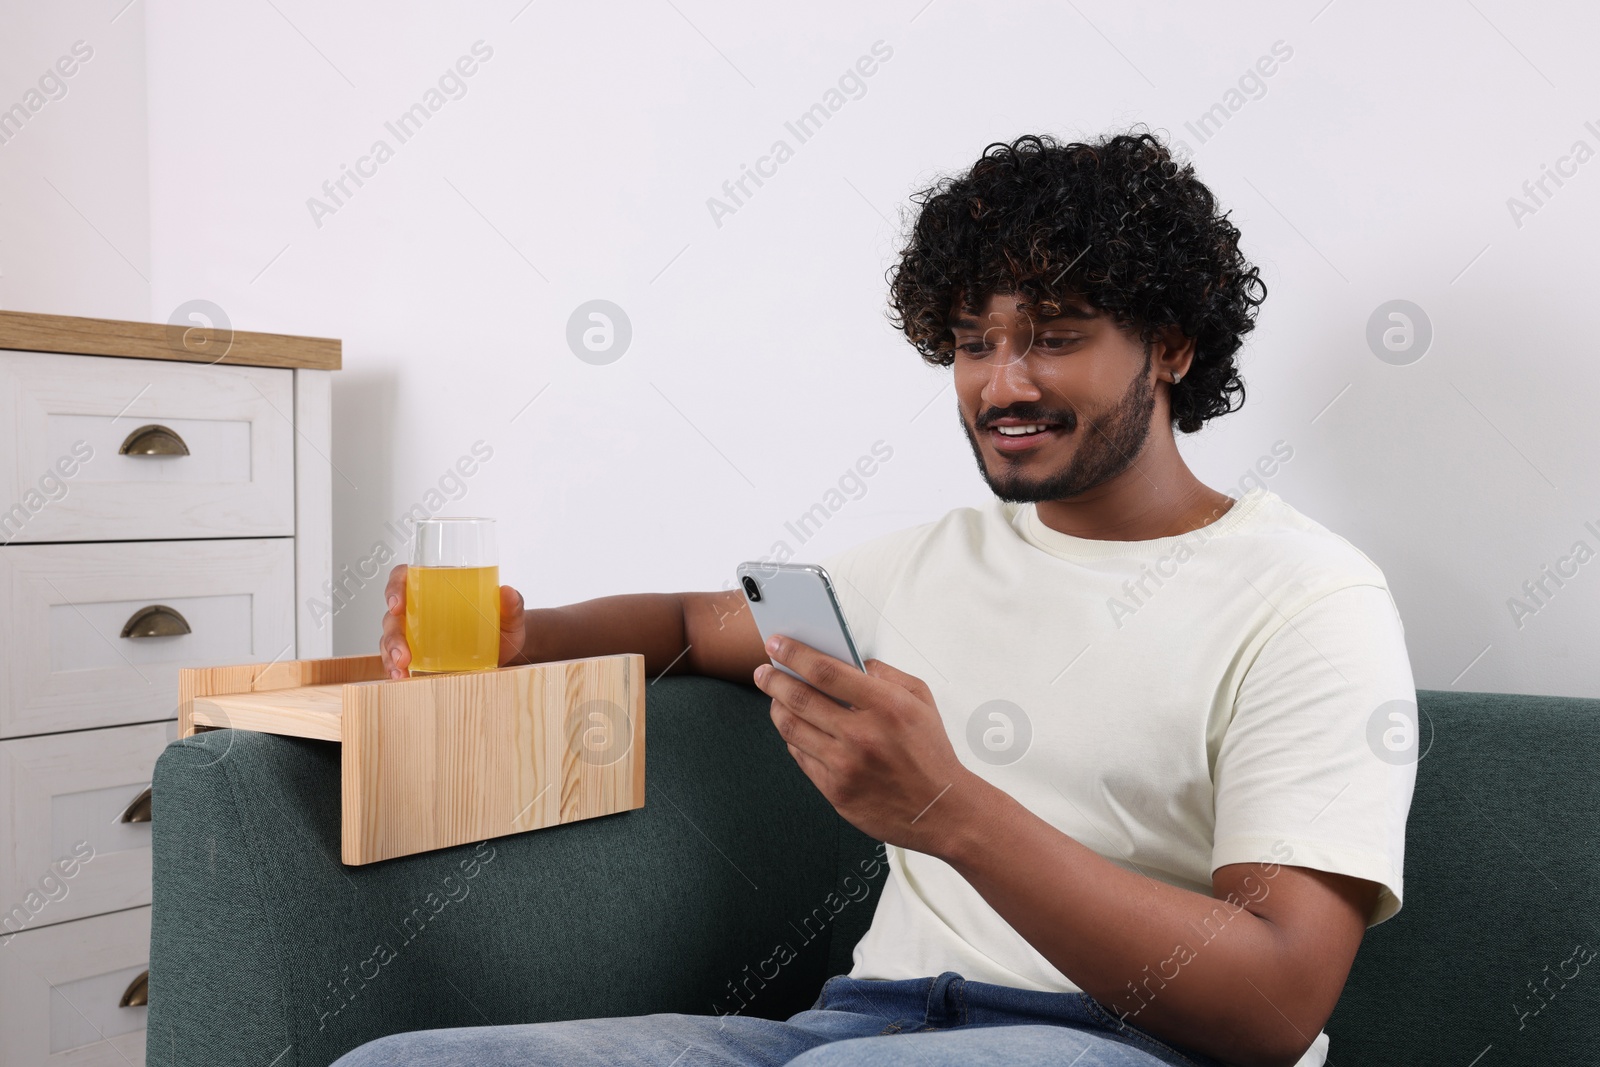 Photo of Happy man using smartphone and holding glass of juice on sofa with wooden armrest table at home